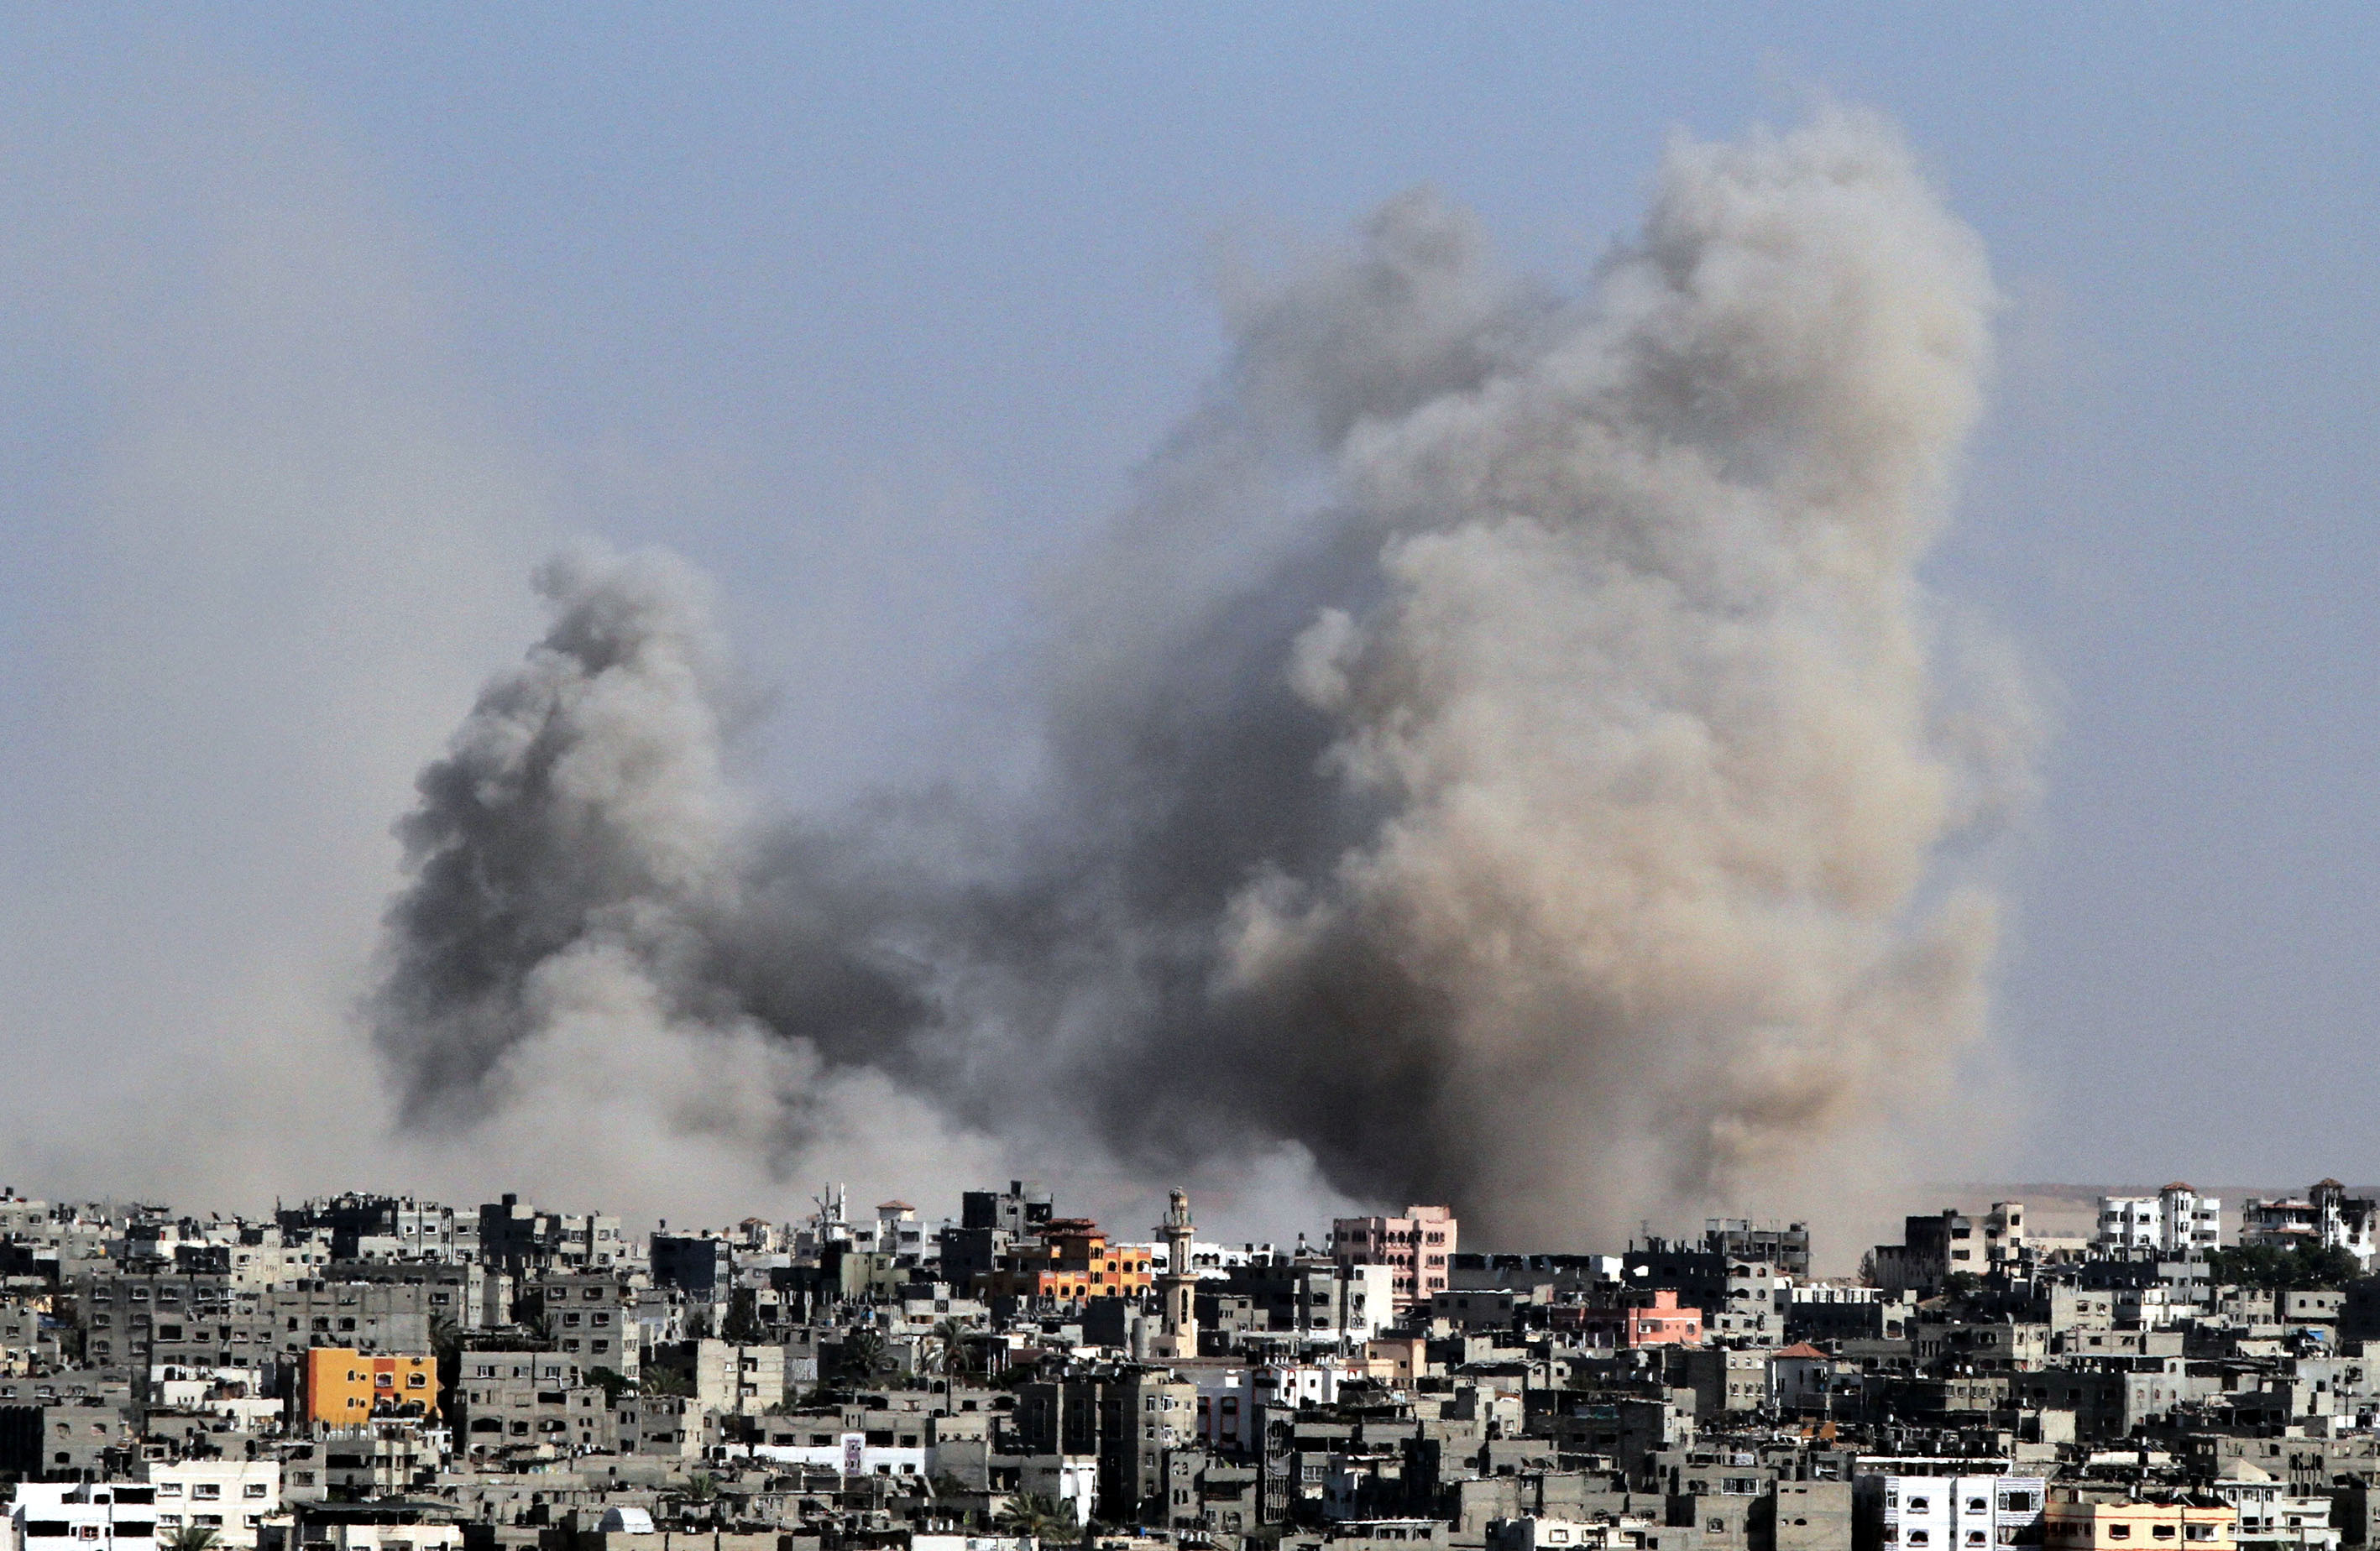 Smoke rises from a building following the Israeli attacks in Gaza City on July 25, 2014. (Anadolu Agency—Getty Images)